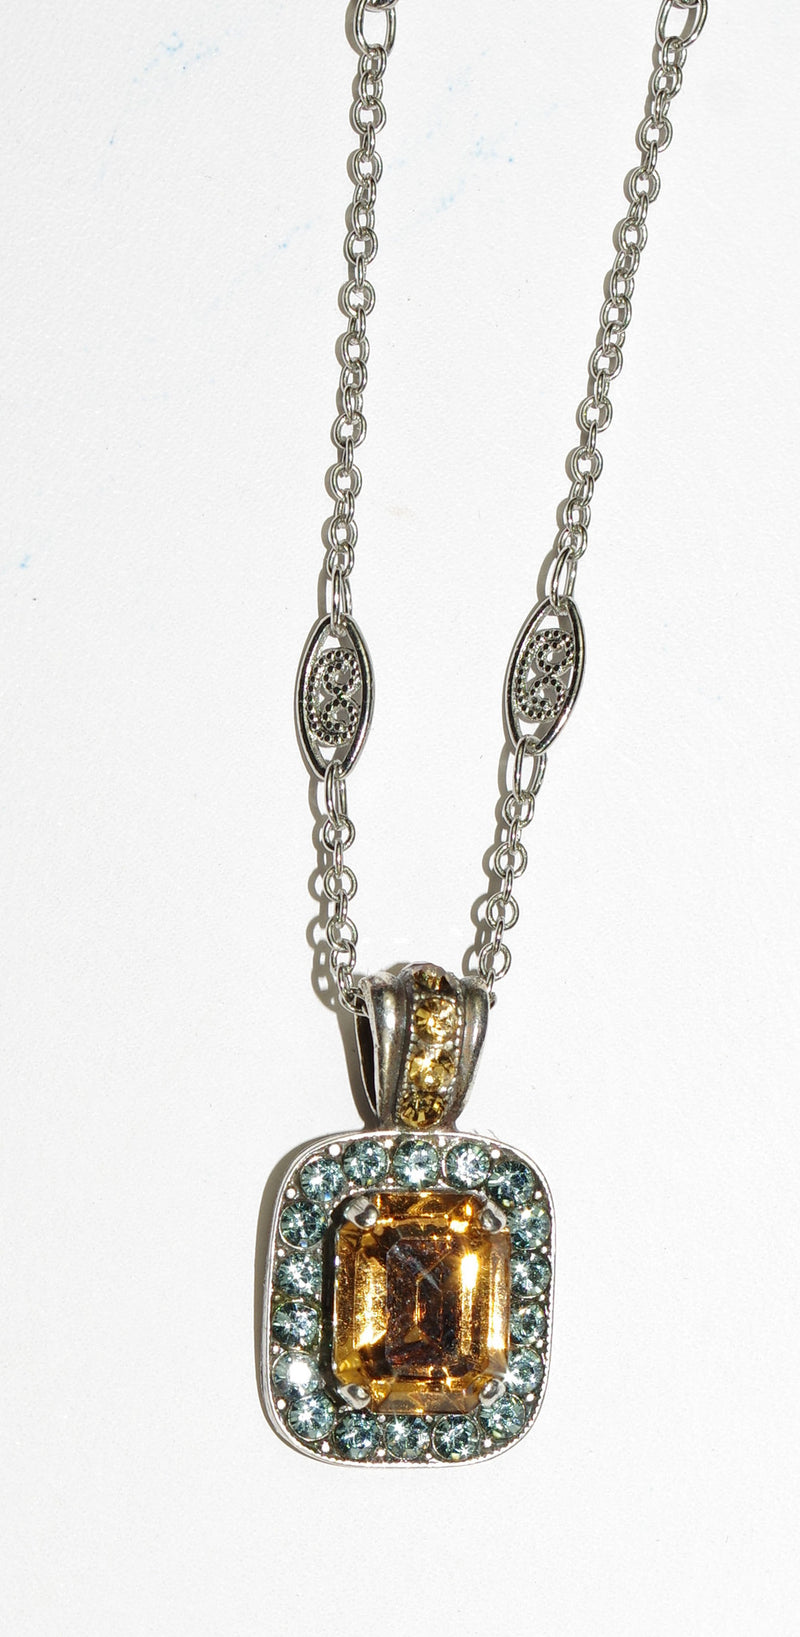 MARIANA PENDANT MOON DROPS amber stone with topaz small stones, 18" chain in silver setting